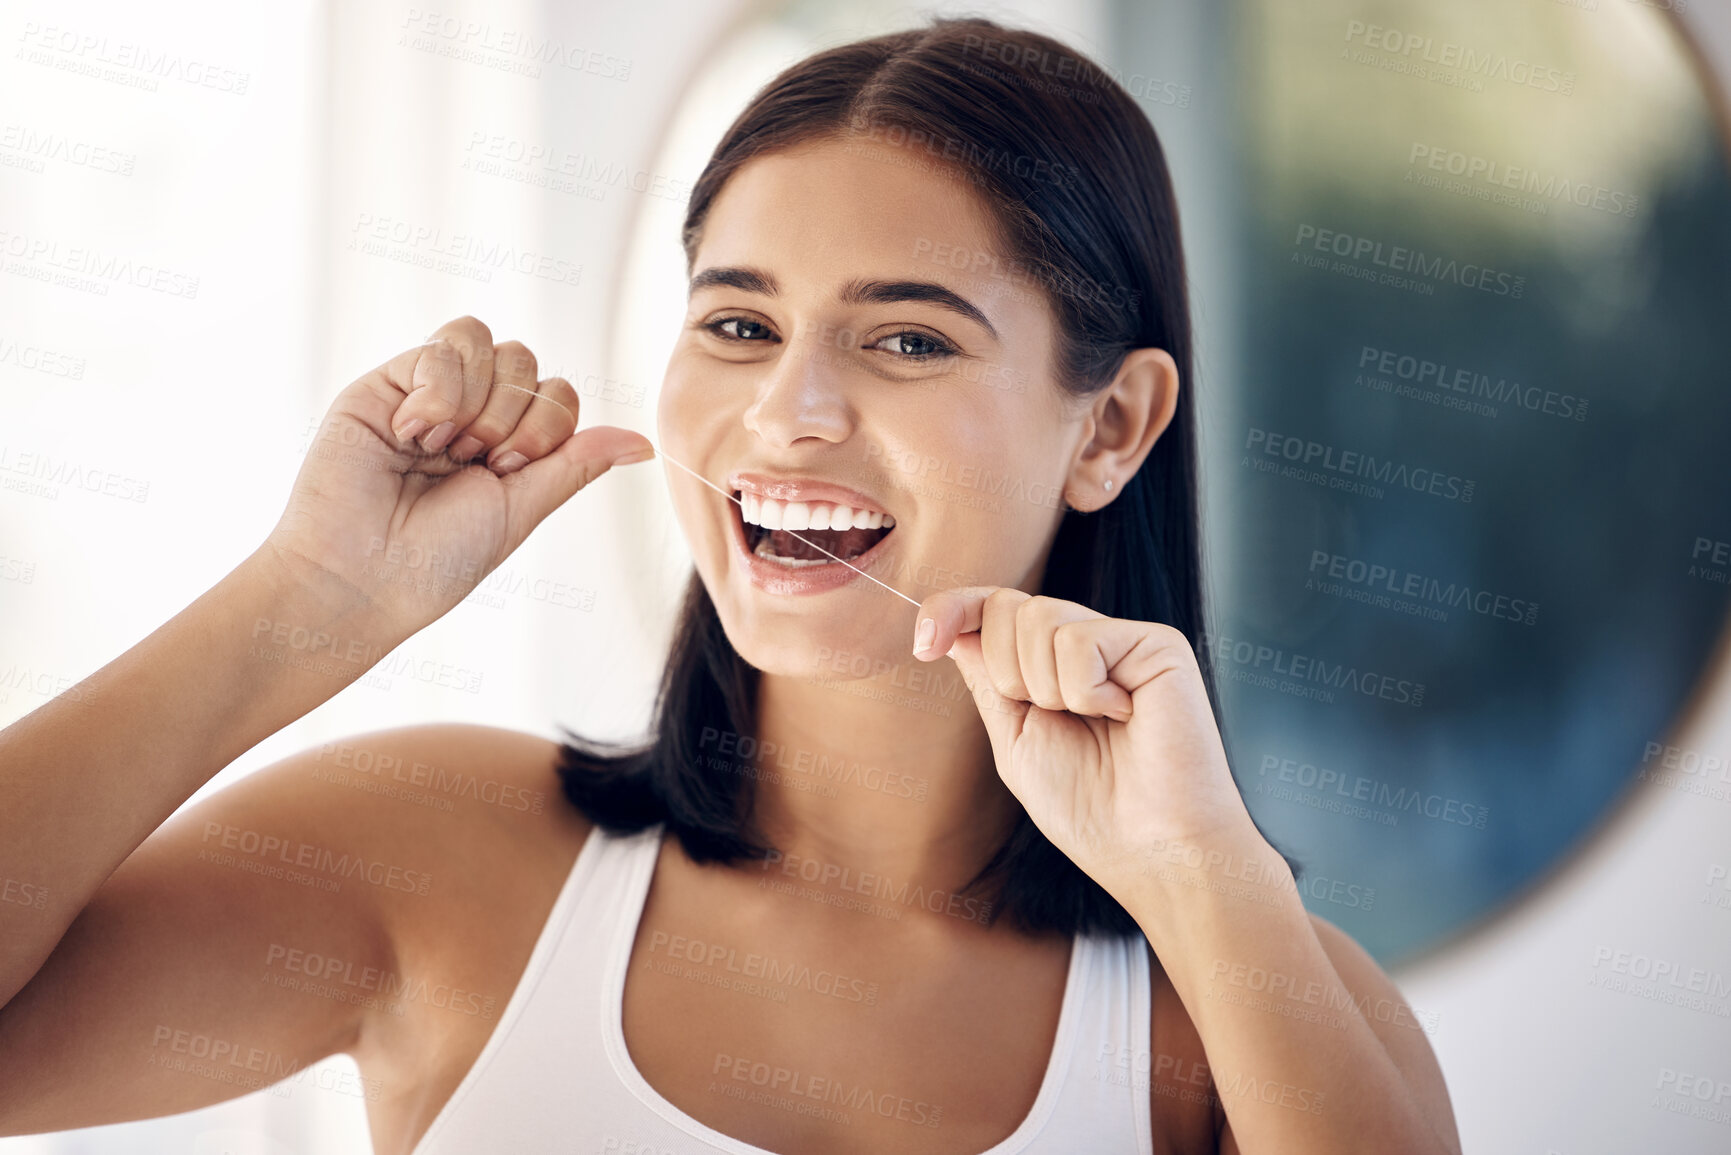 Buy stock photo Smile, woman in bathroom flossing teeth and morning dental care routine in home mirror. Health, wellness and Indian woman with dental floss, motivation for cleaning for healthy mouth and fresh breath